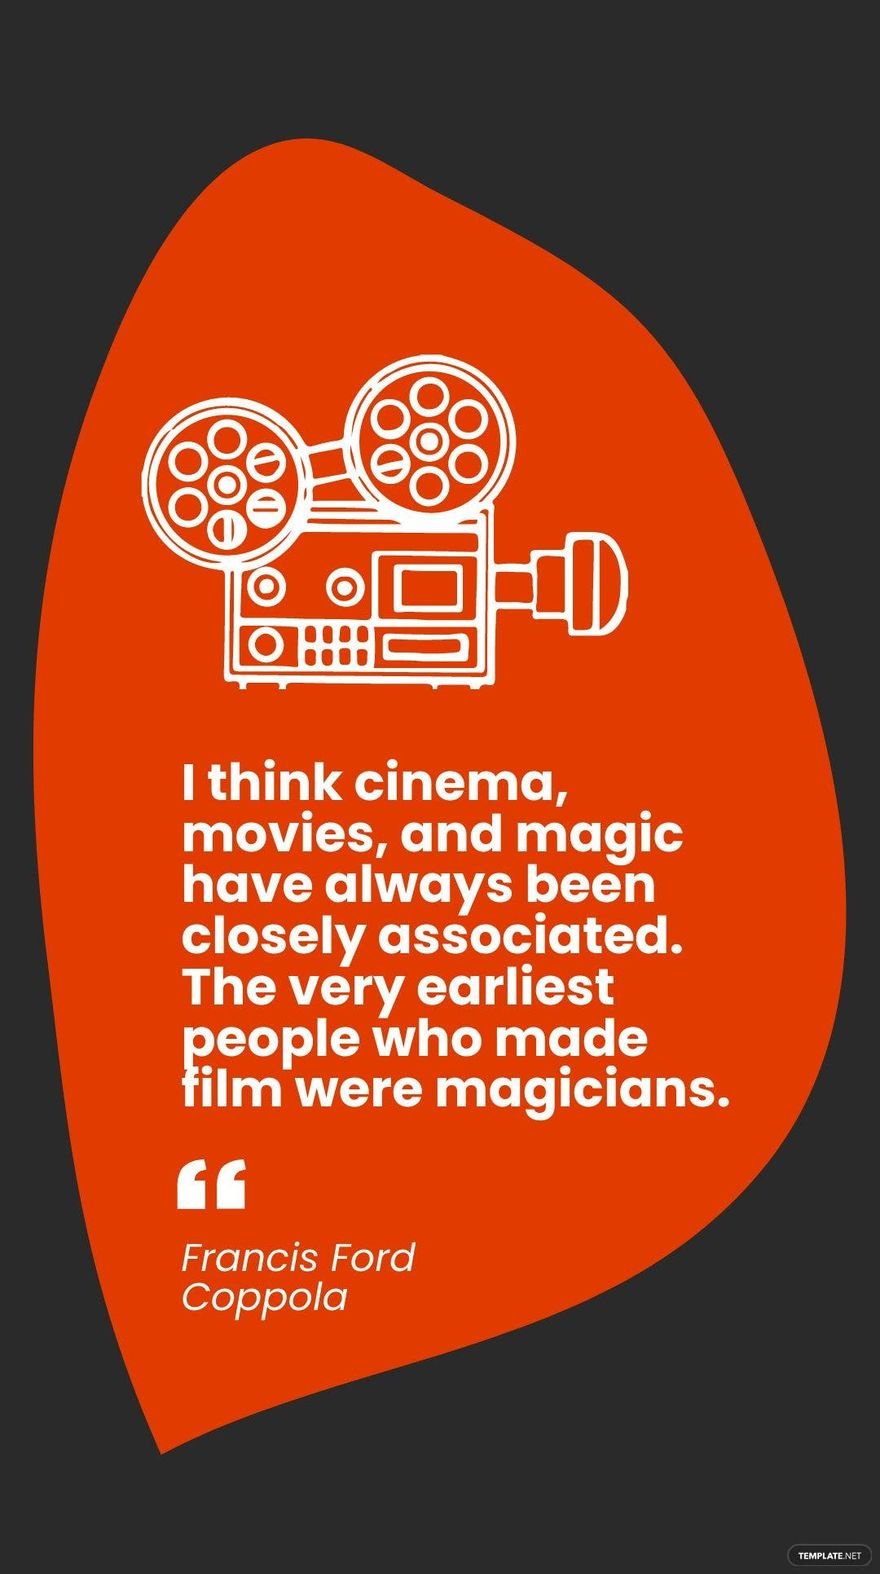 Francis Ford Coppola - I think cinema, movies, and magic have always been closely associated. The very earliest people who made film were magicians.